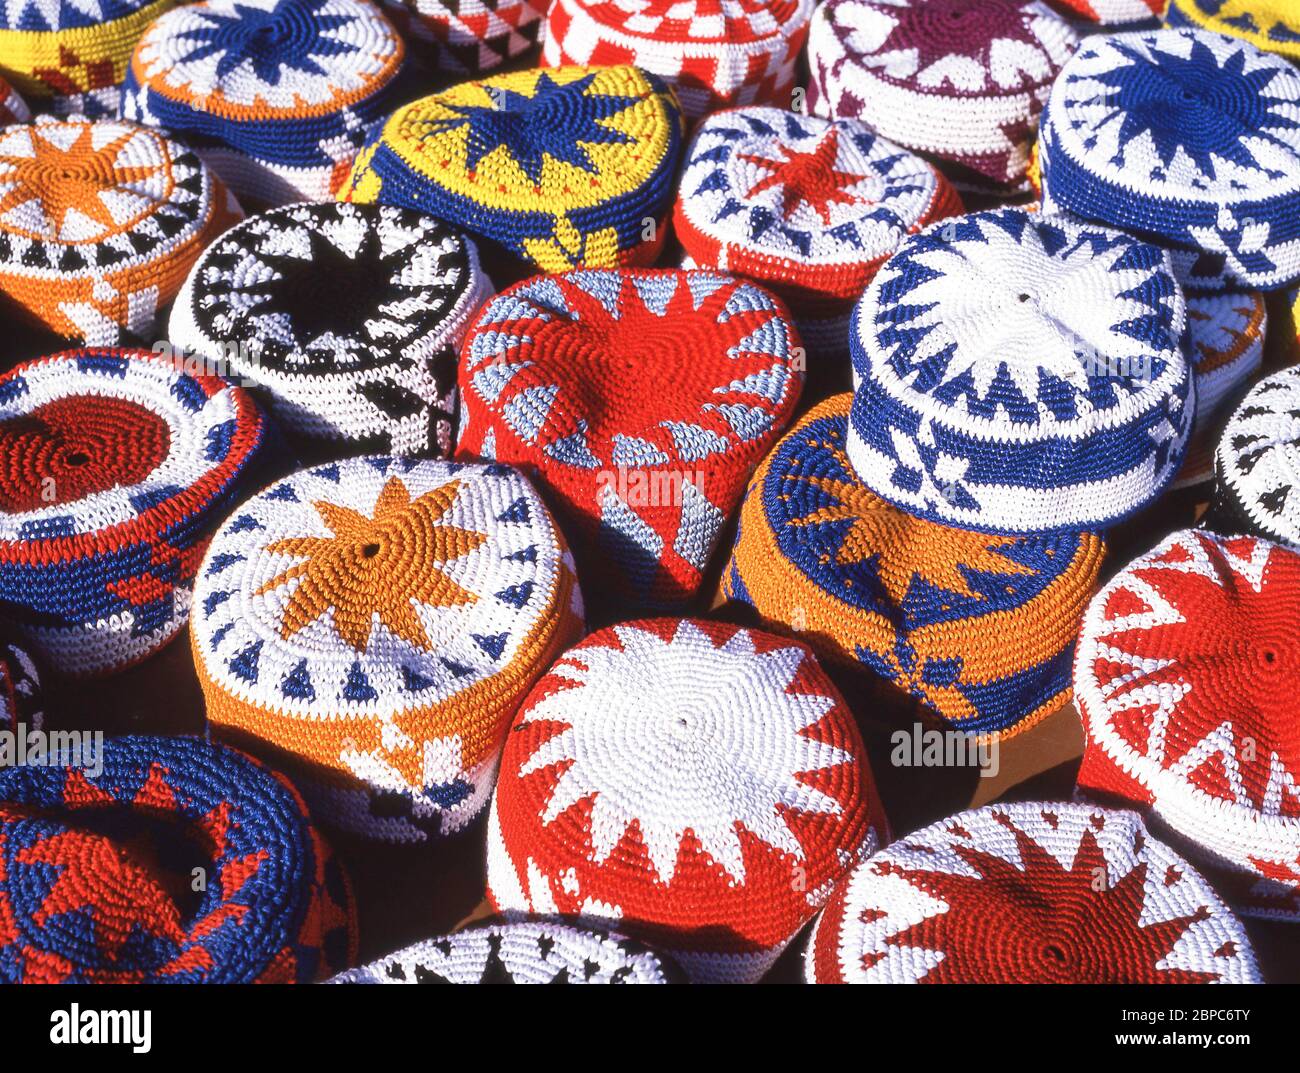 Nubian hats for sale in souk, Luxor, Luxor Governorate, Republic of Egypt Stock Photo